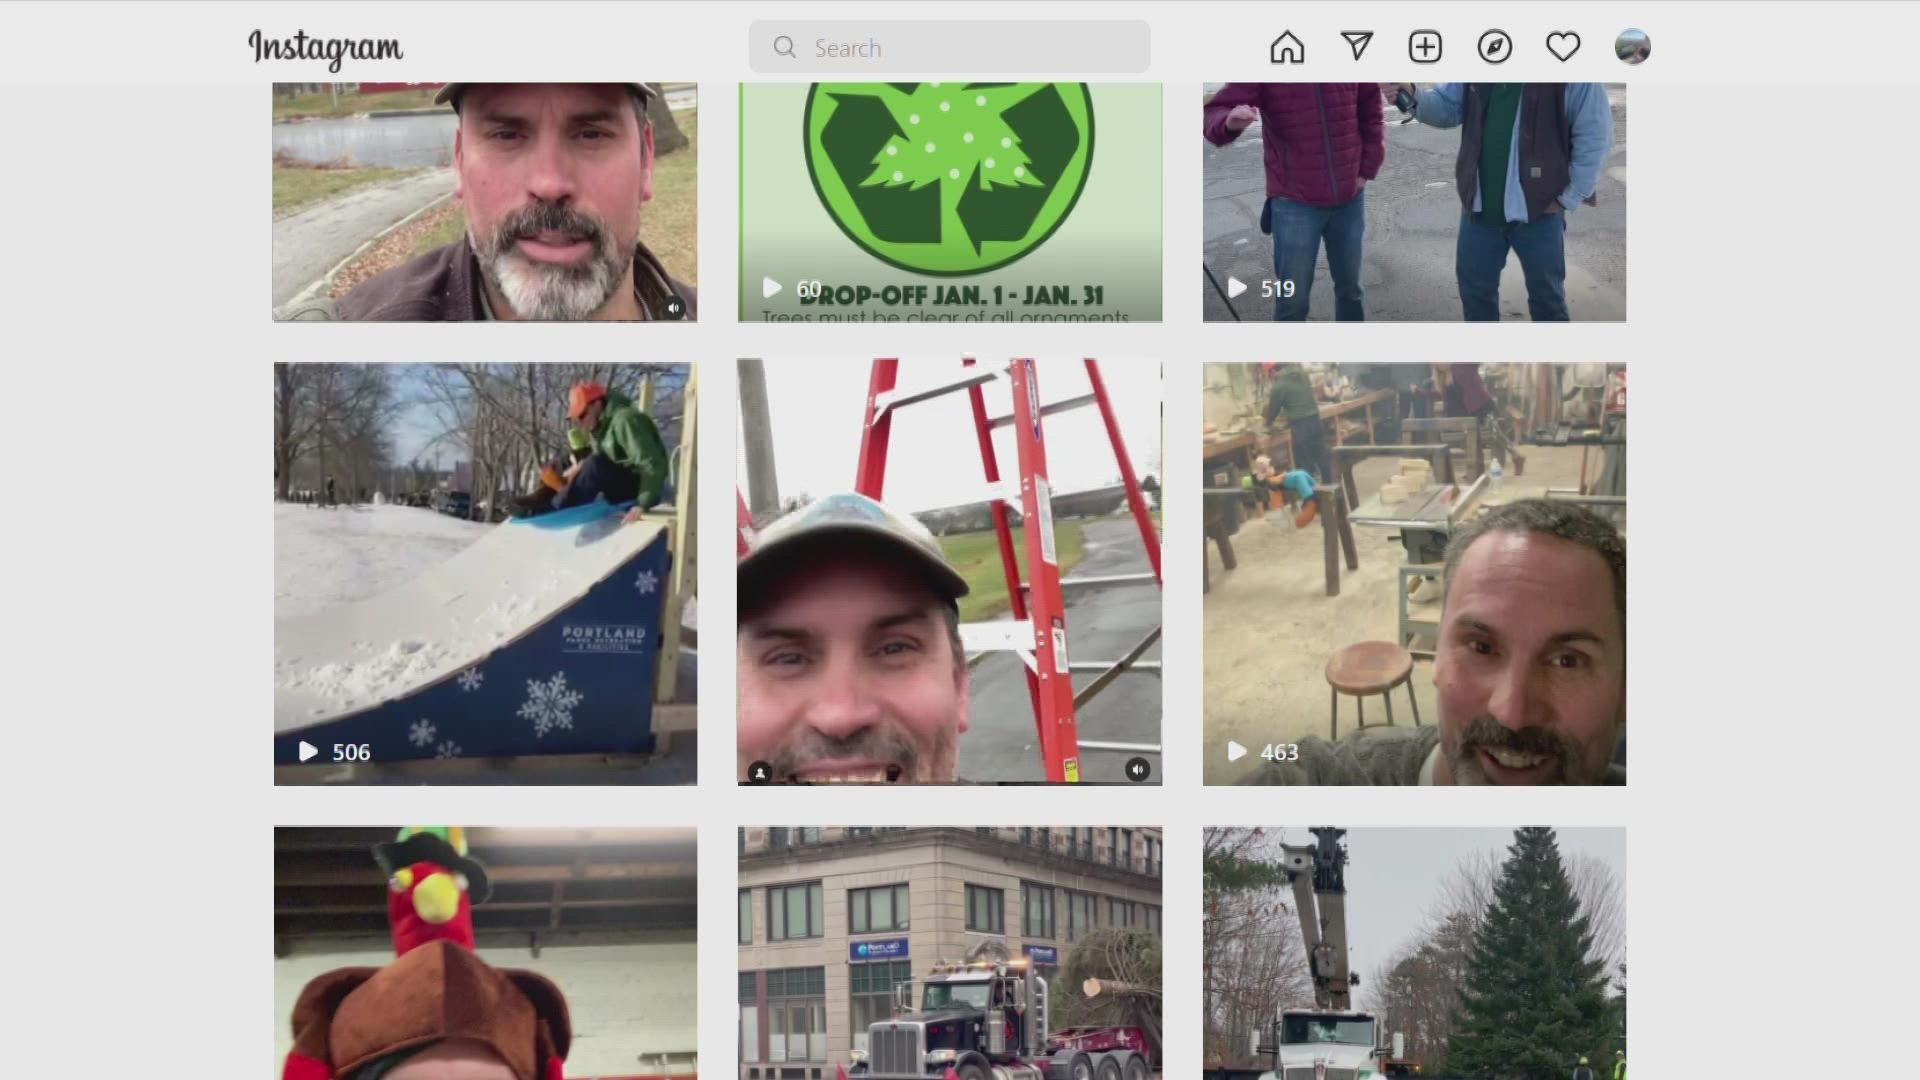 Tater, known for his 'Tater Reports' is a playground safety inspector for Portland. Through videos, he shows the 'hidden gems' Portland offers while having fun.